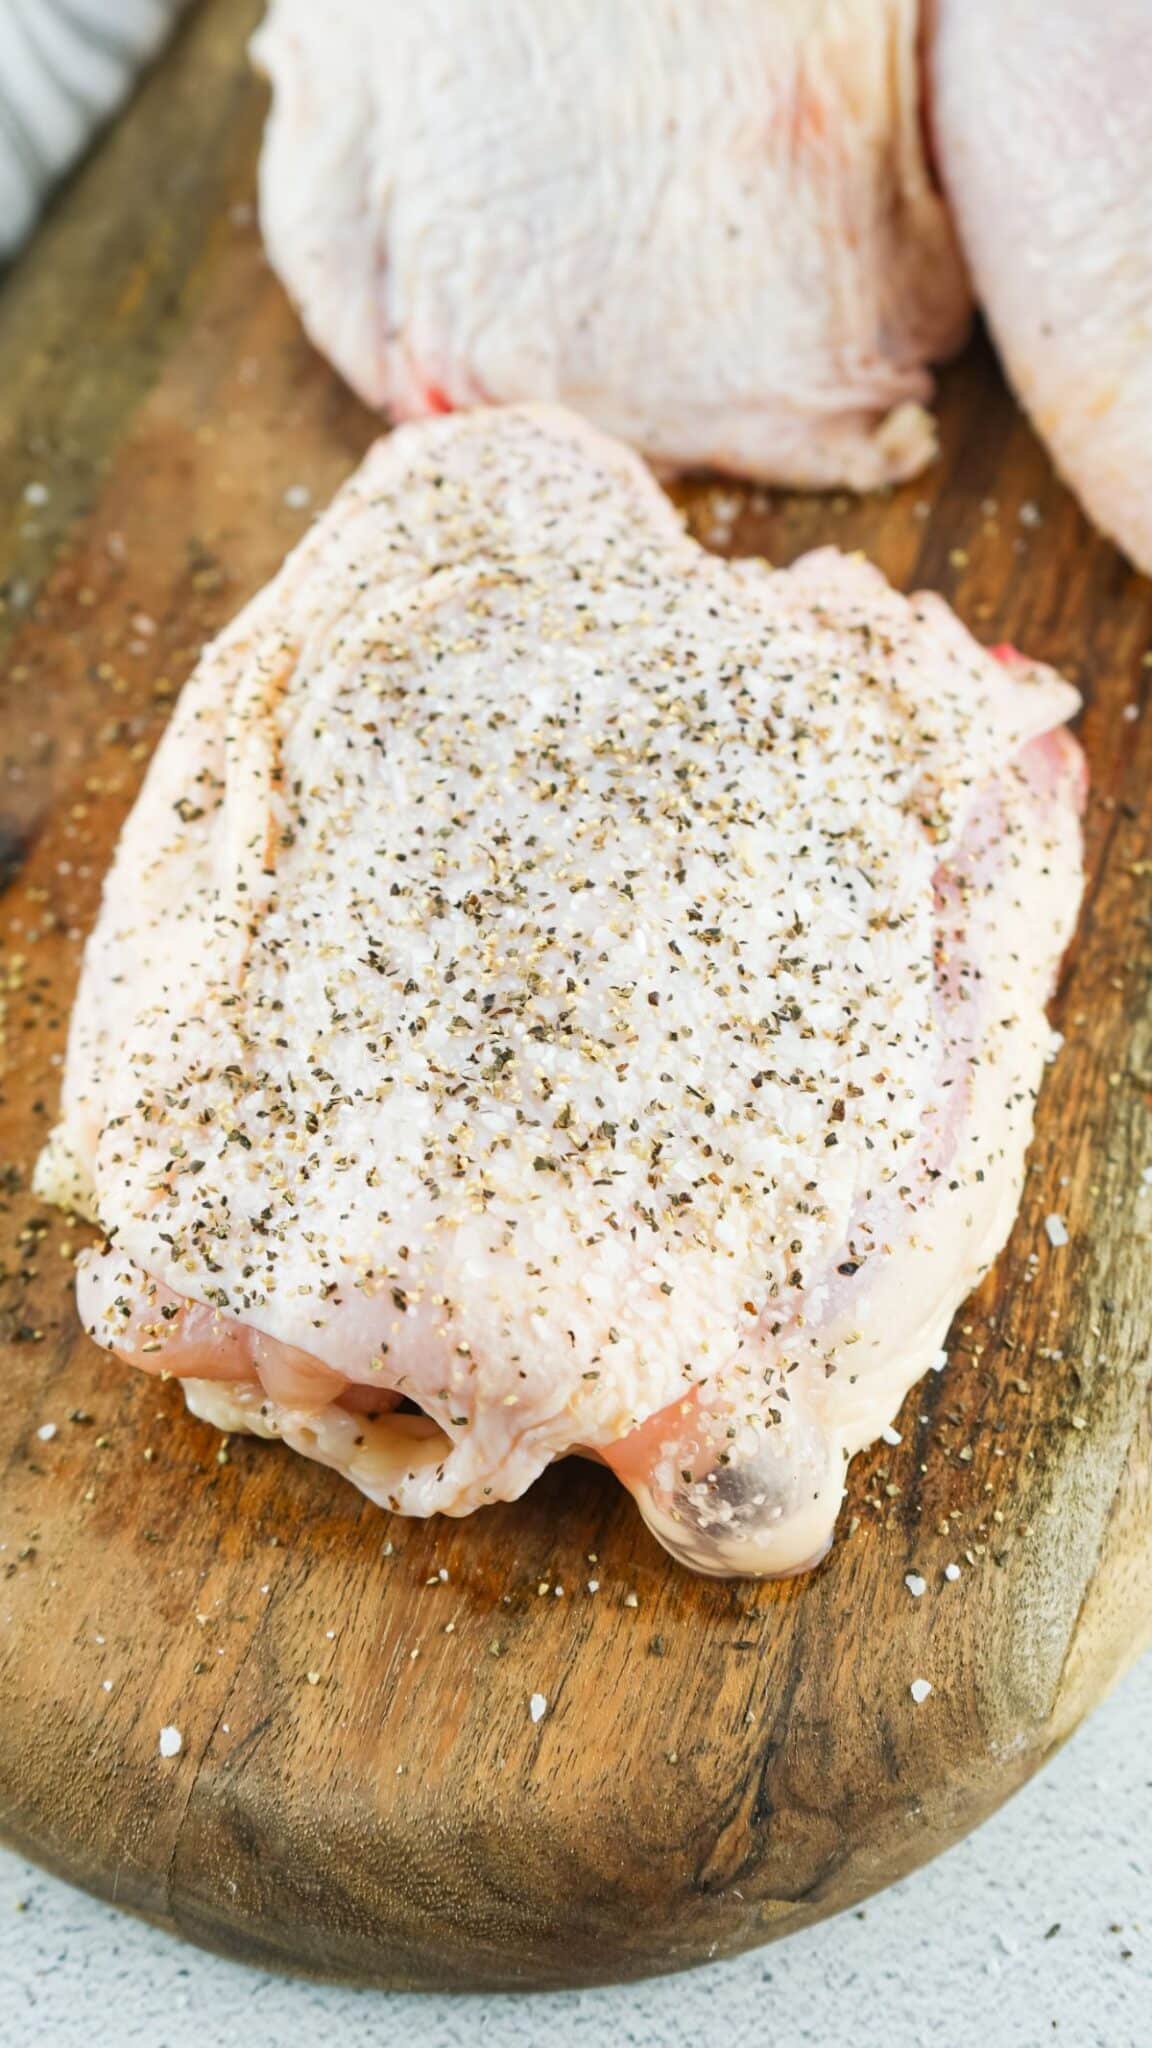 Chicken thighs are being seasoned with salt and black pepper.